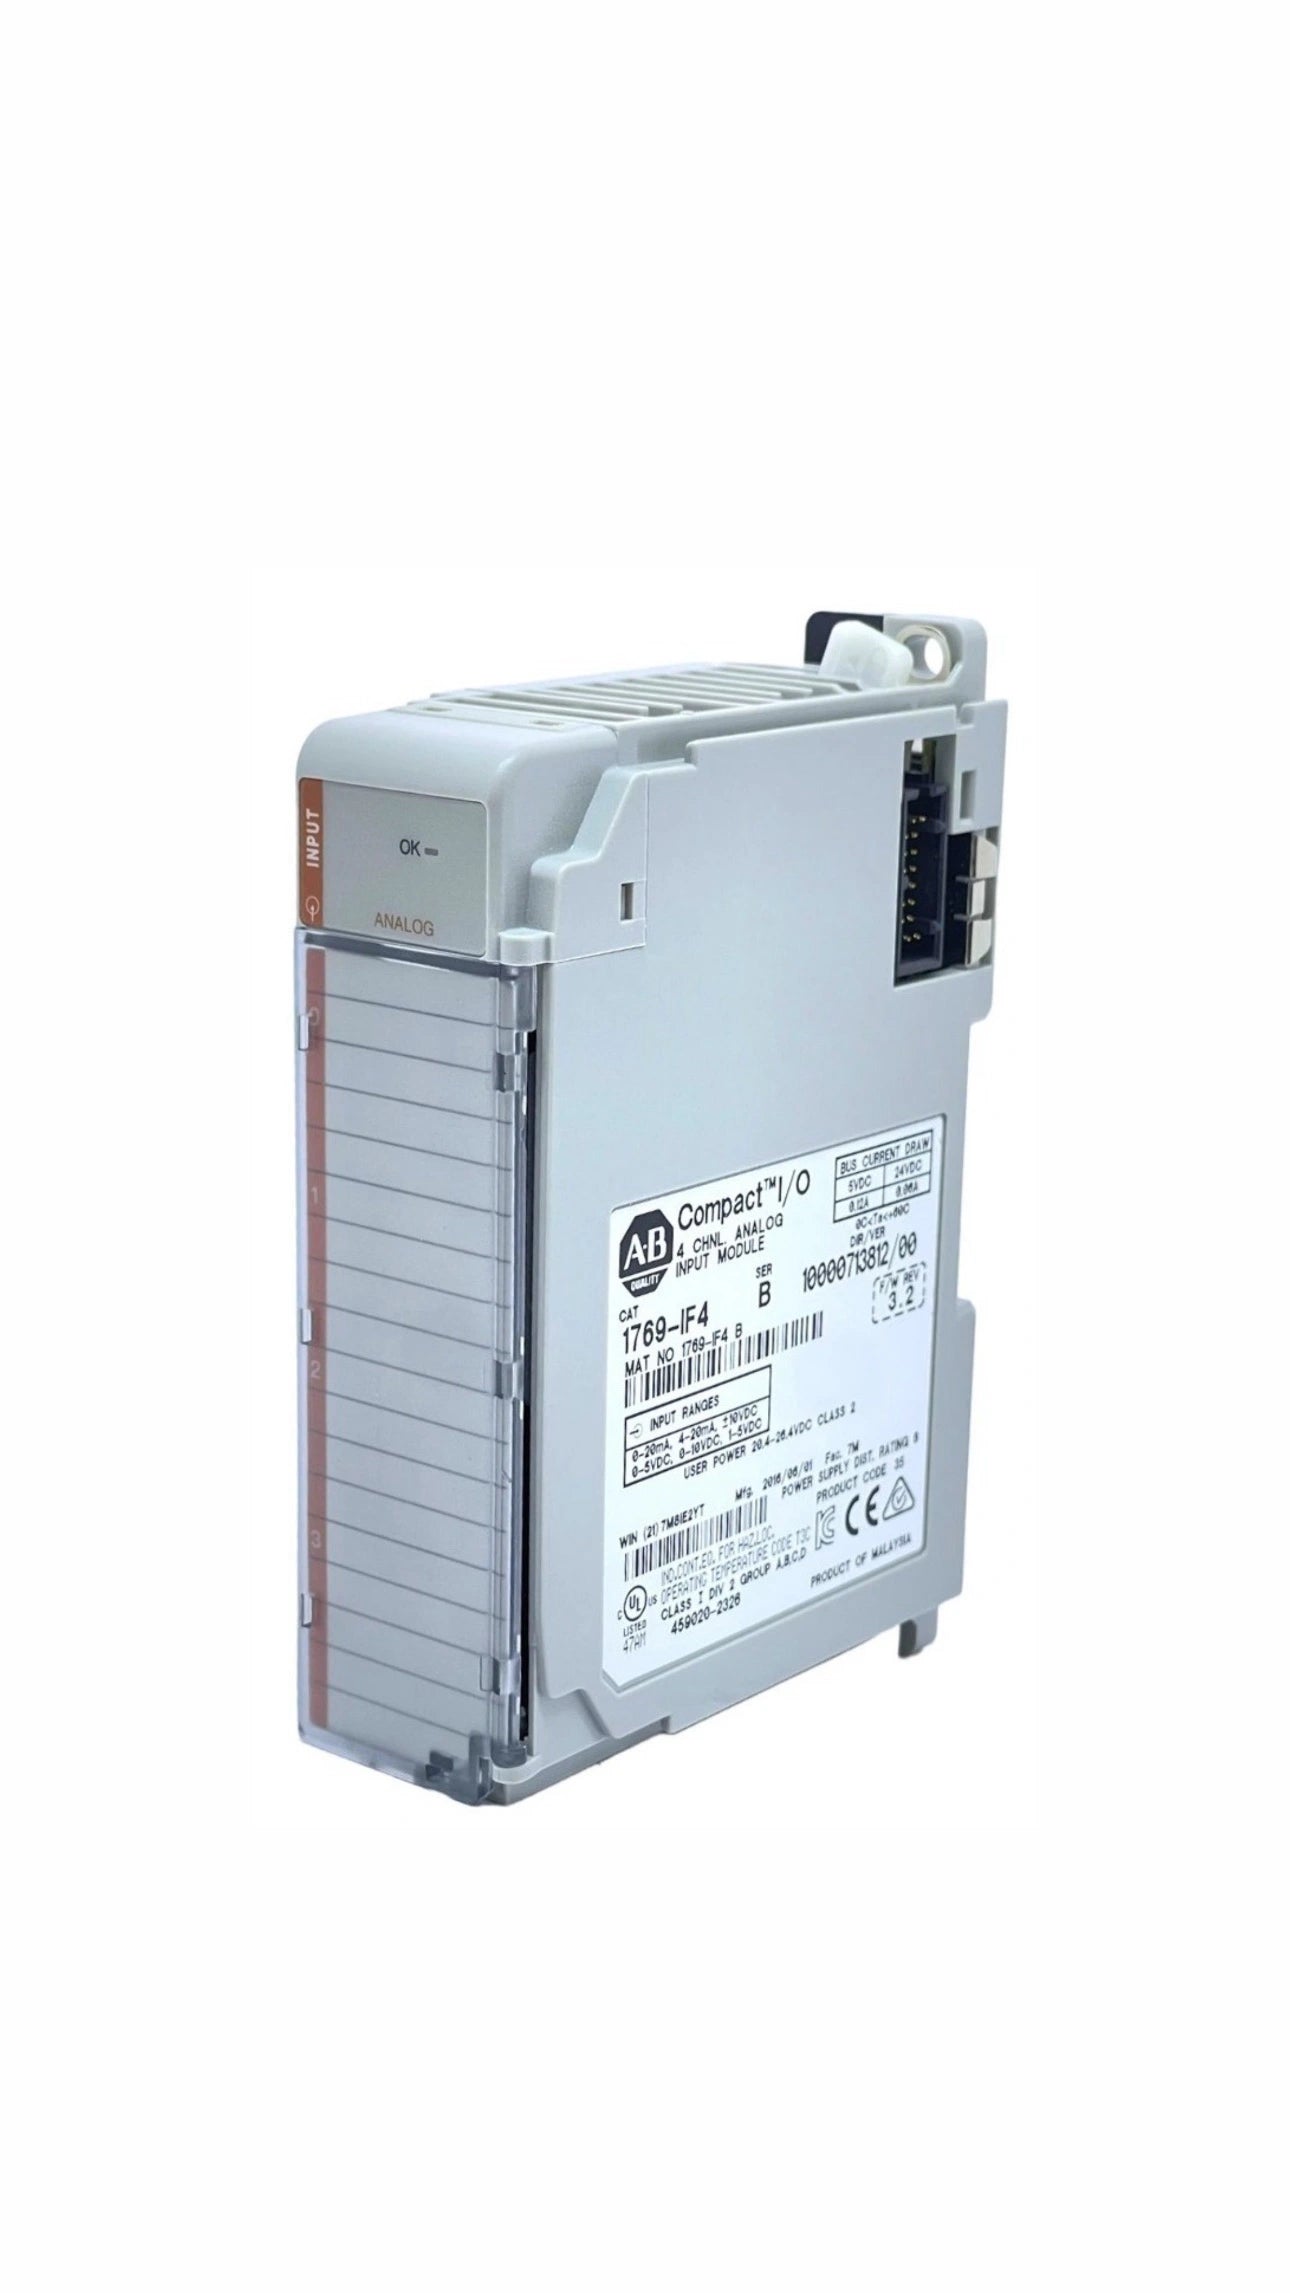 1769-IF4 Allen Bradley CompactLogix analog input module designed for precise acquisition and processing of analog signals in industrial automation.